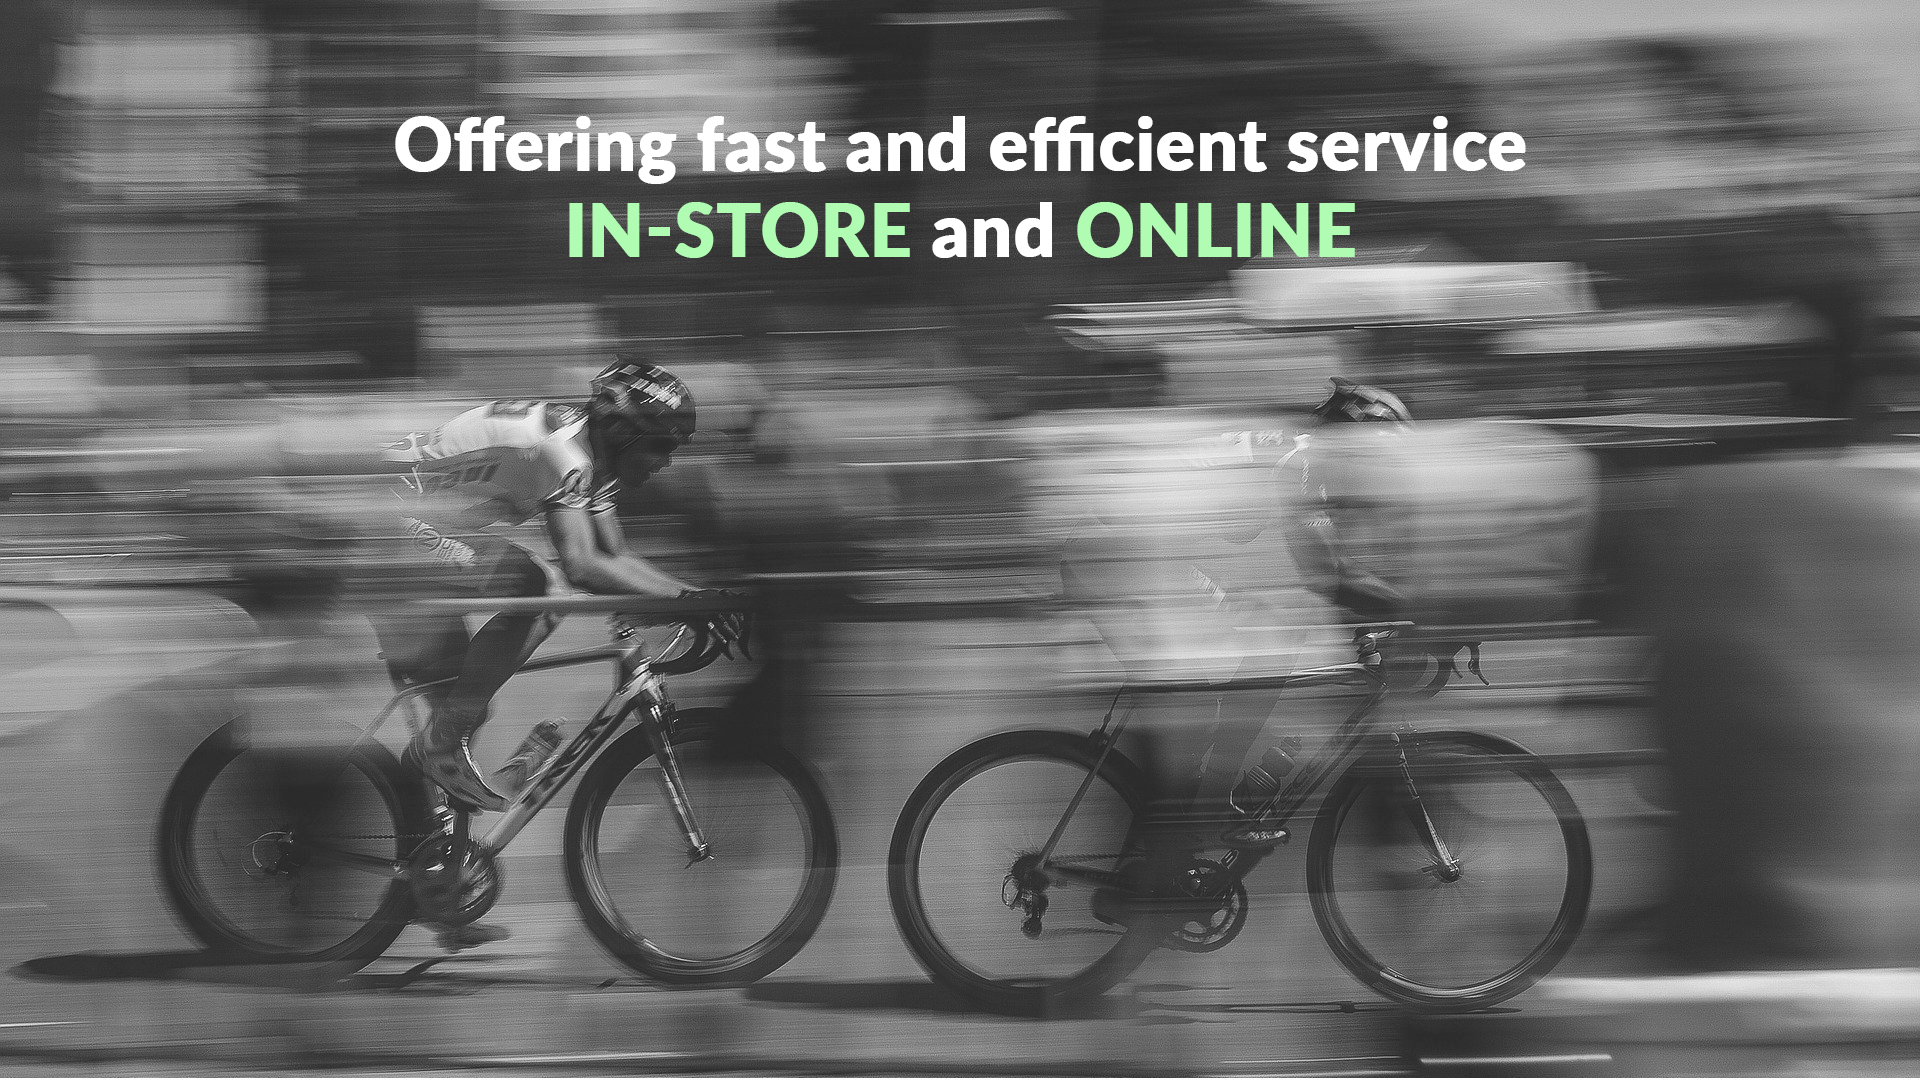 In-store and Online Service